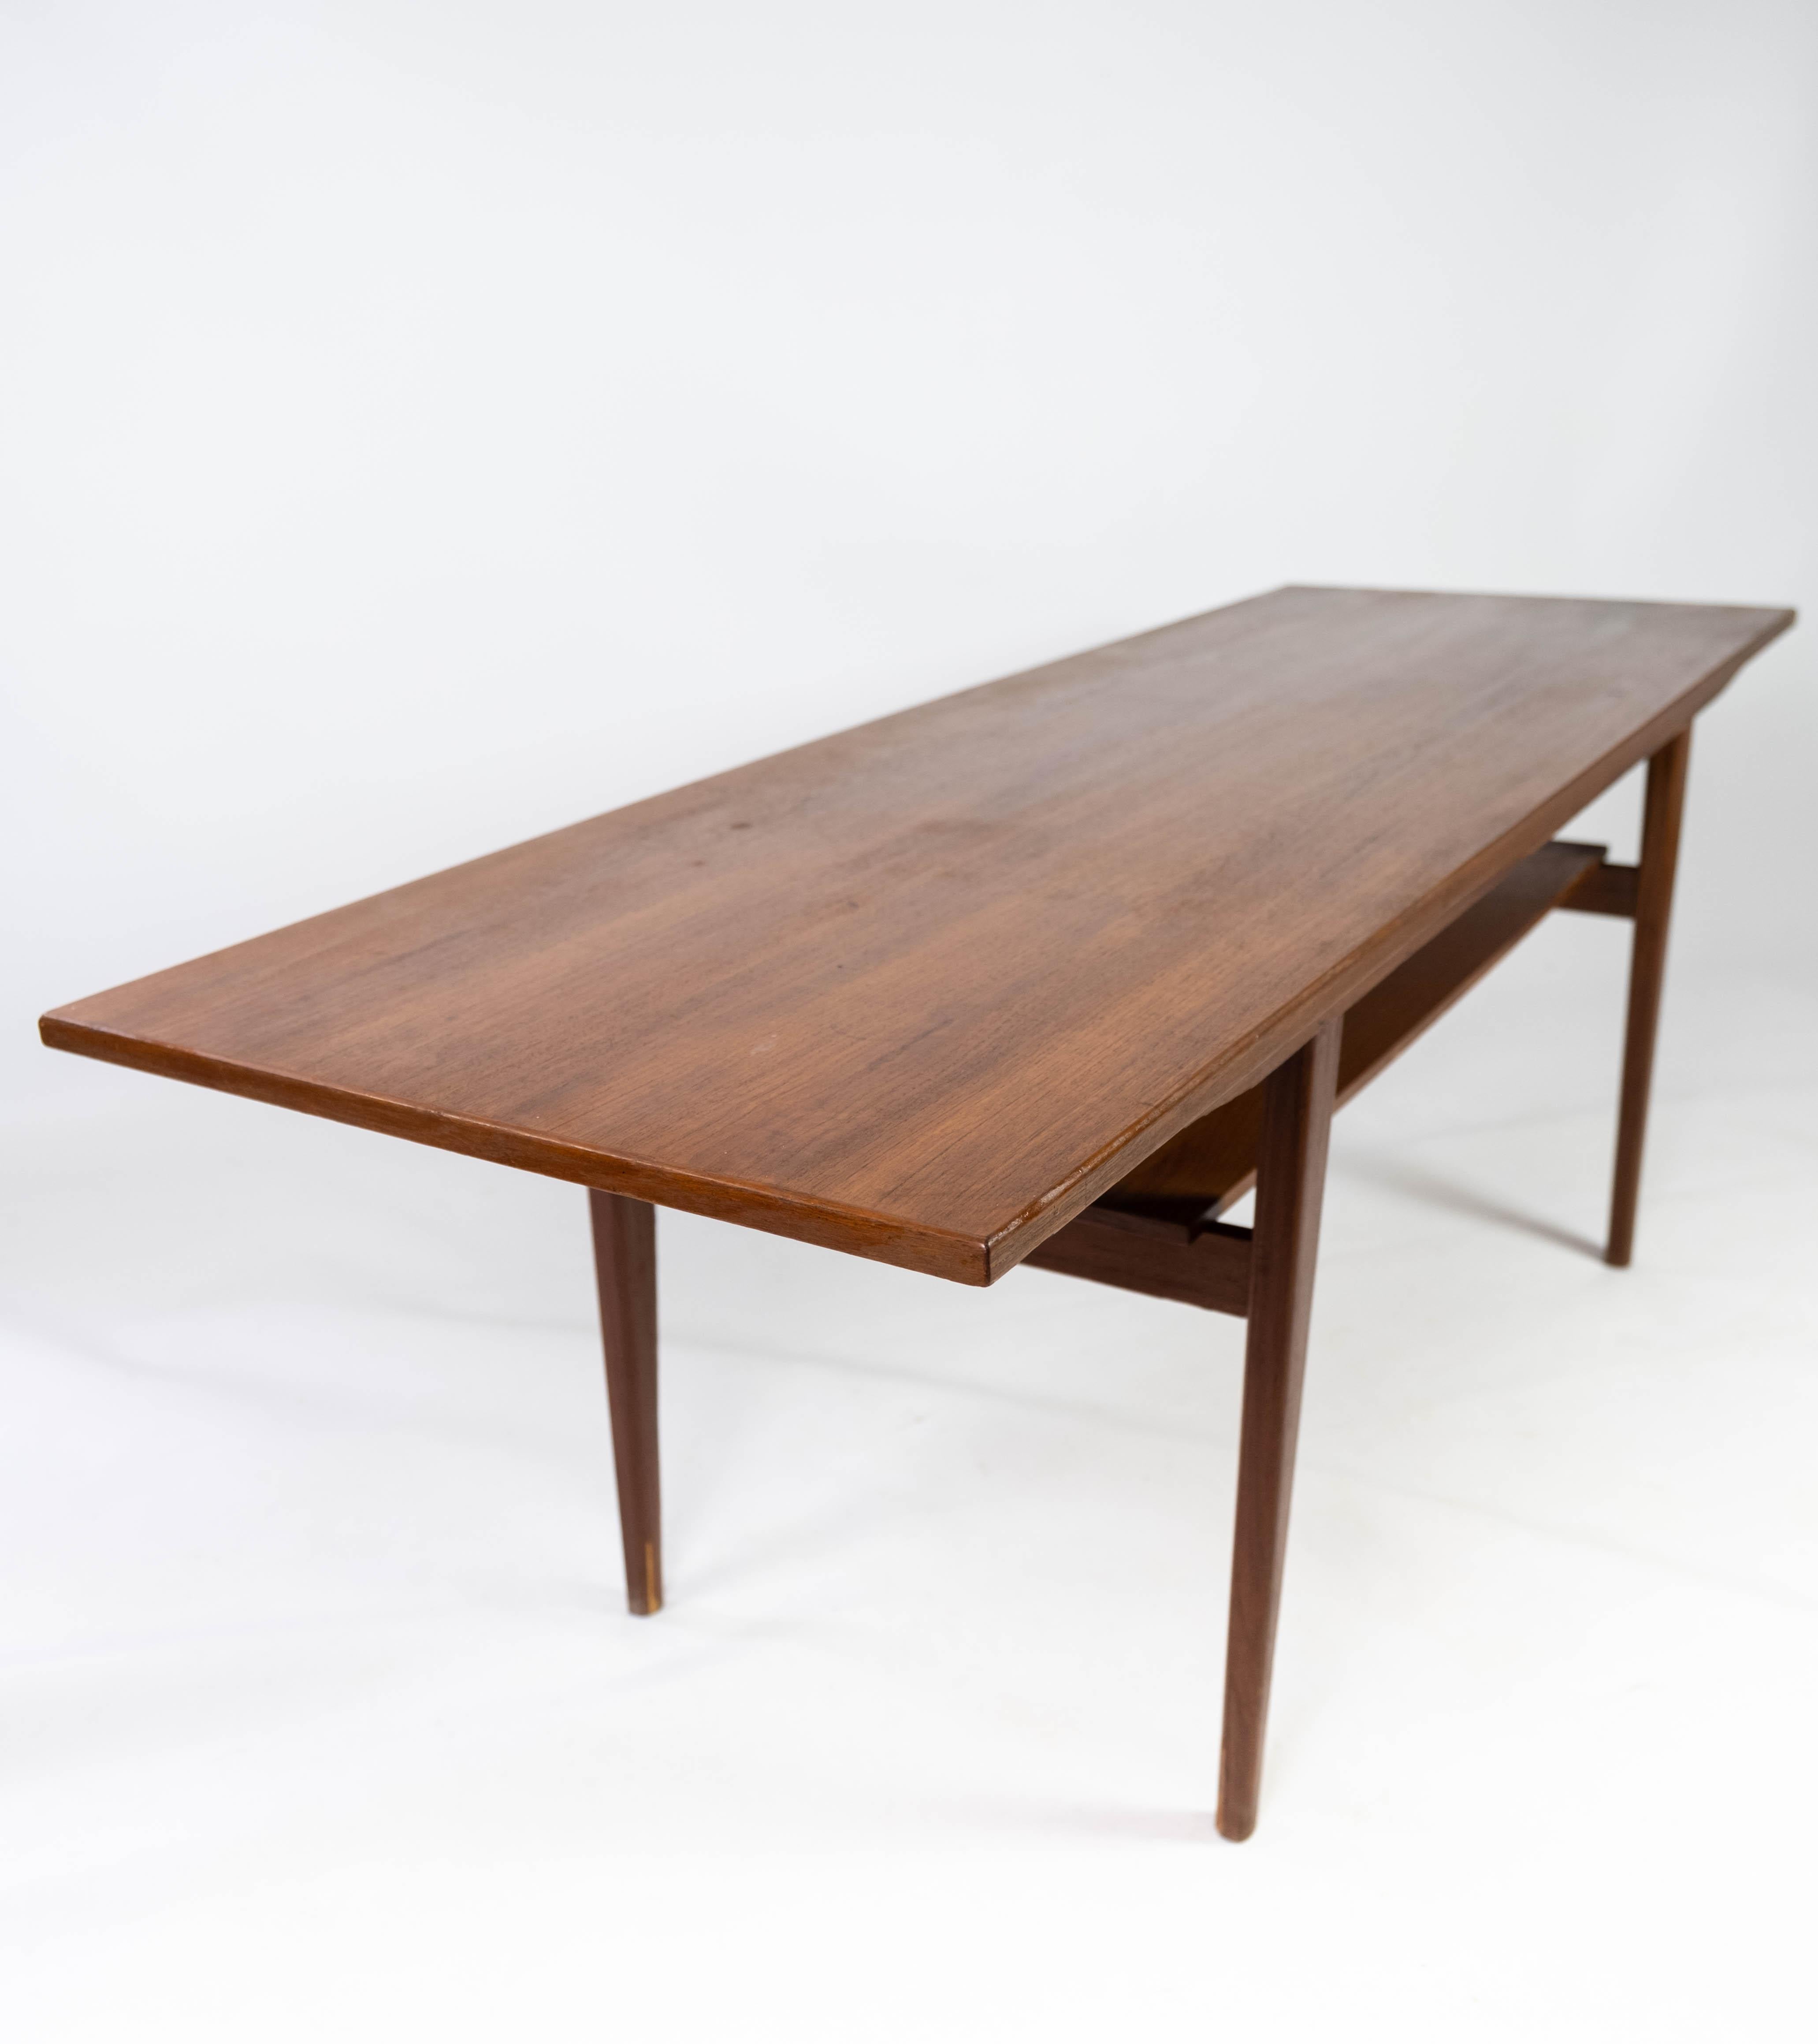 Coffee Table Made In Teak With Shelf, Danish Design From 1960s For Sale 2